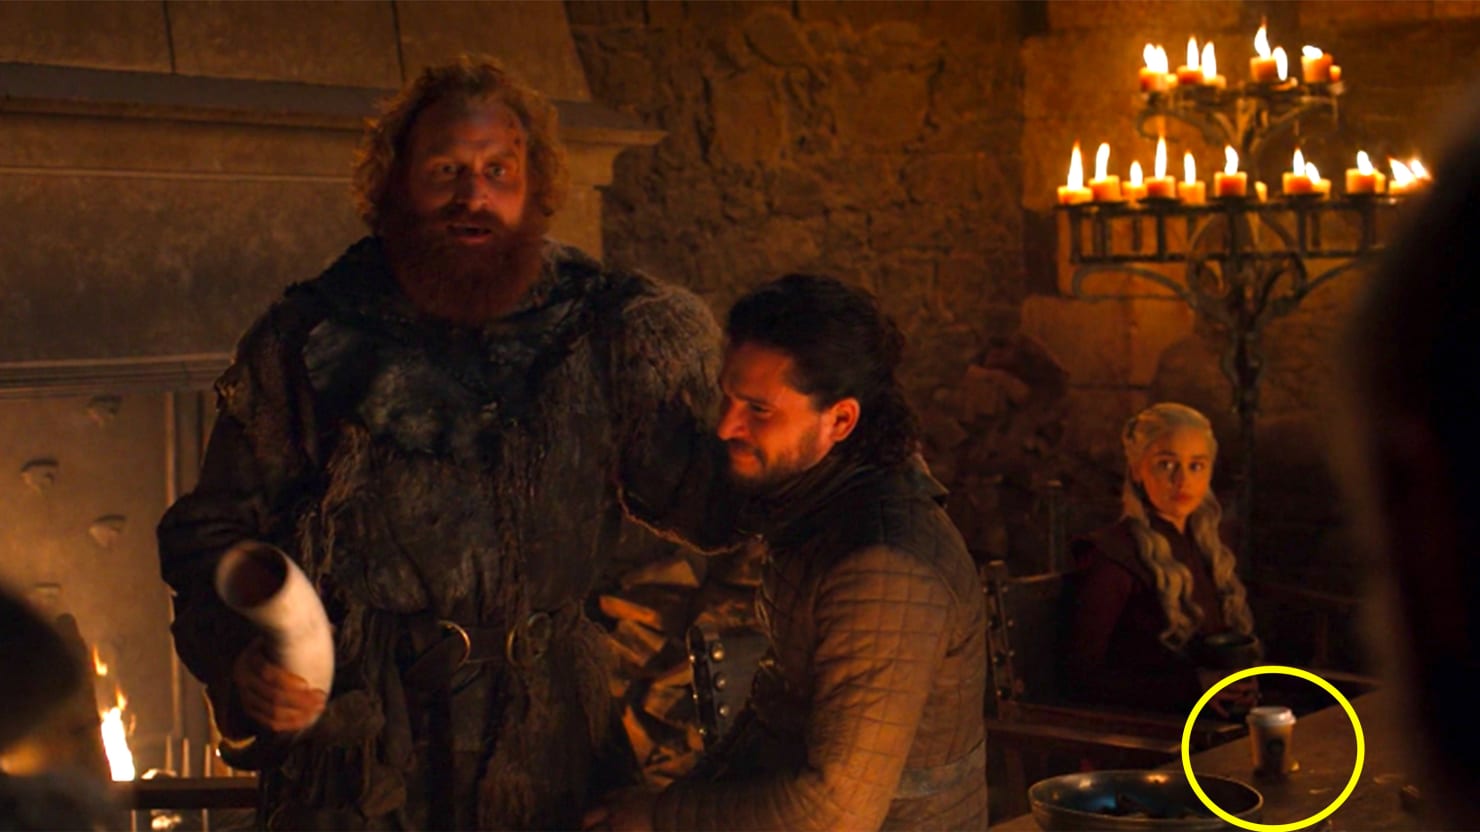 A scene of the renowned series Games of Thrones where one can see a starbucks coffee cup on the table, despite the ancient theme of the show.